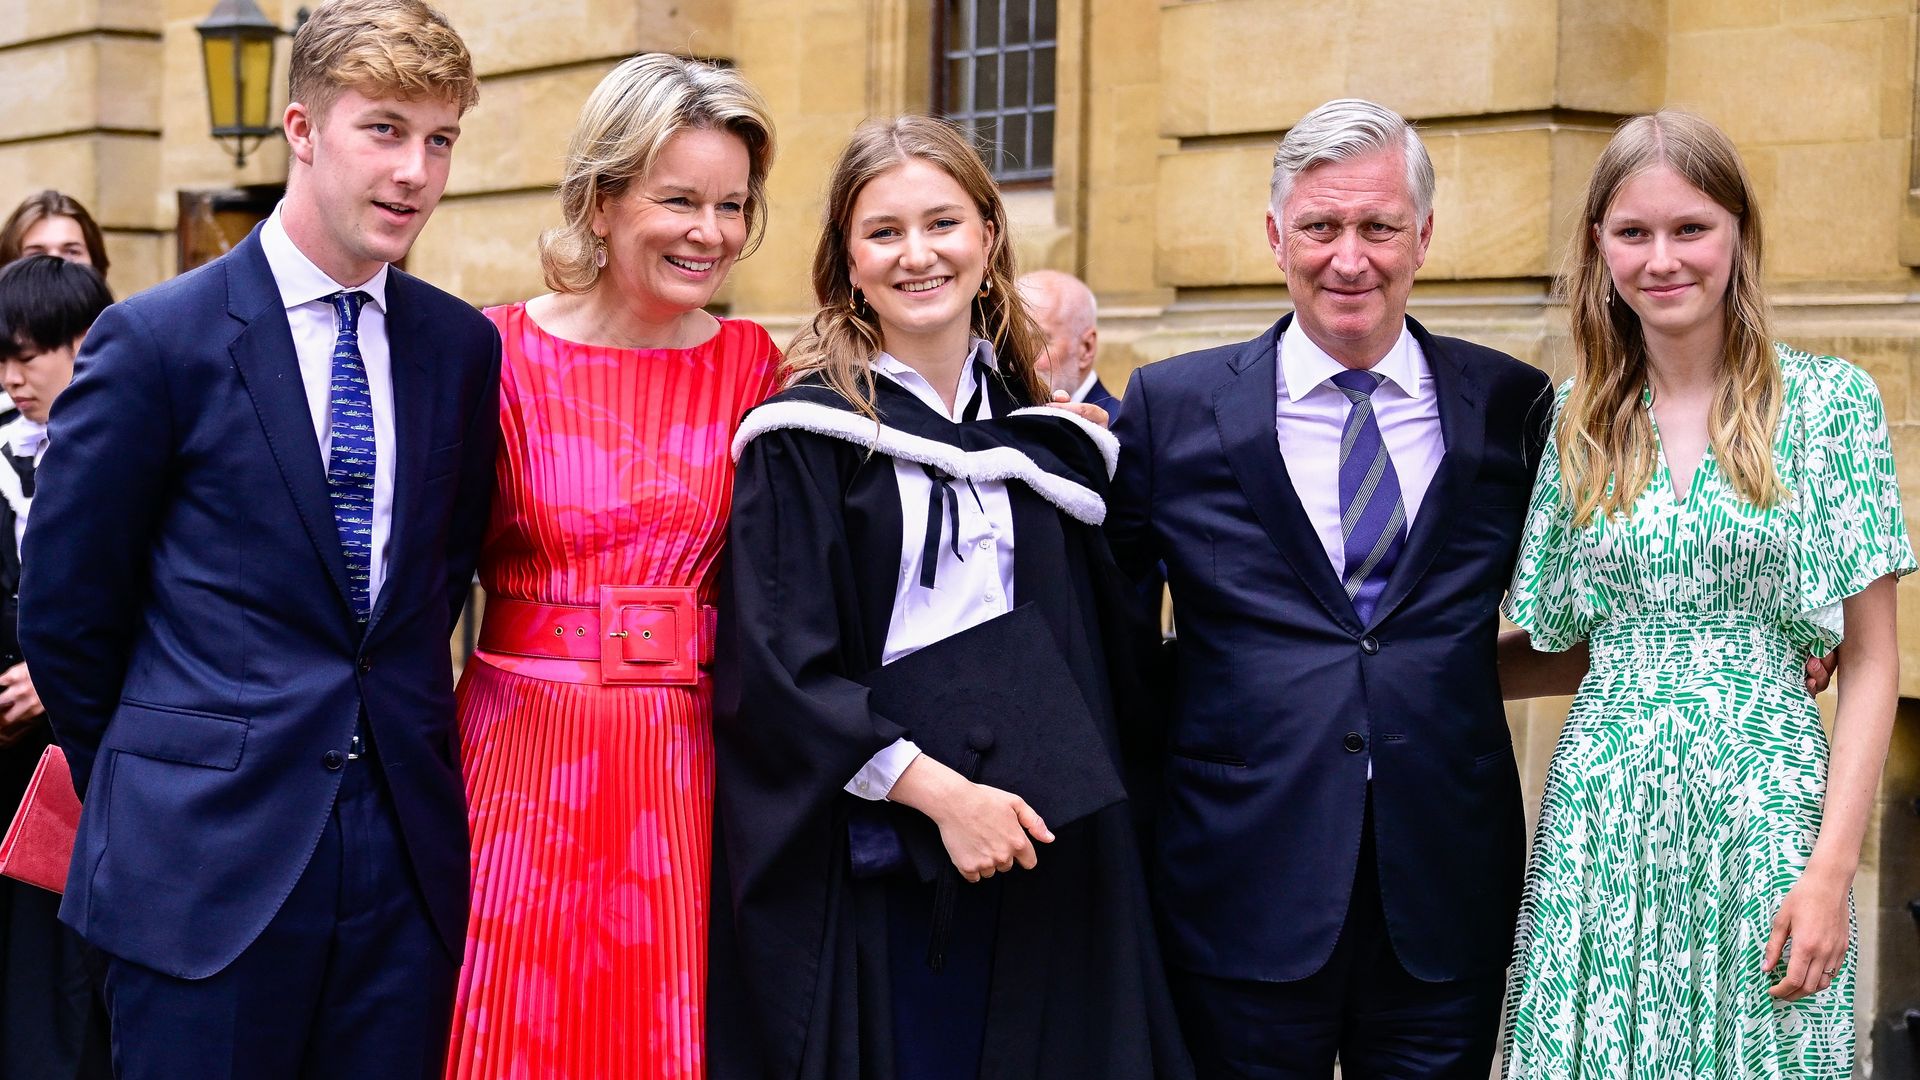 Future Queen is all smiles as she graduates from university